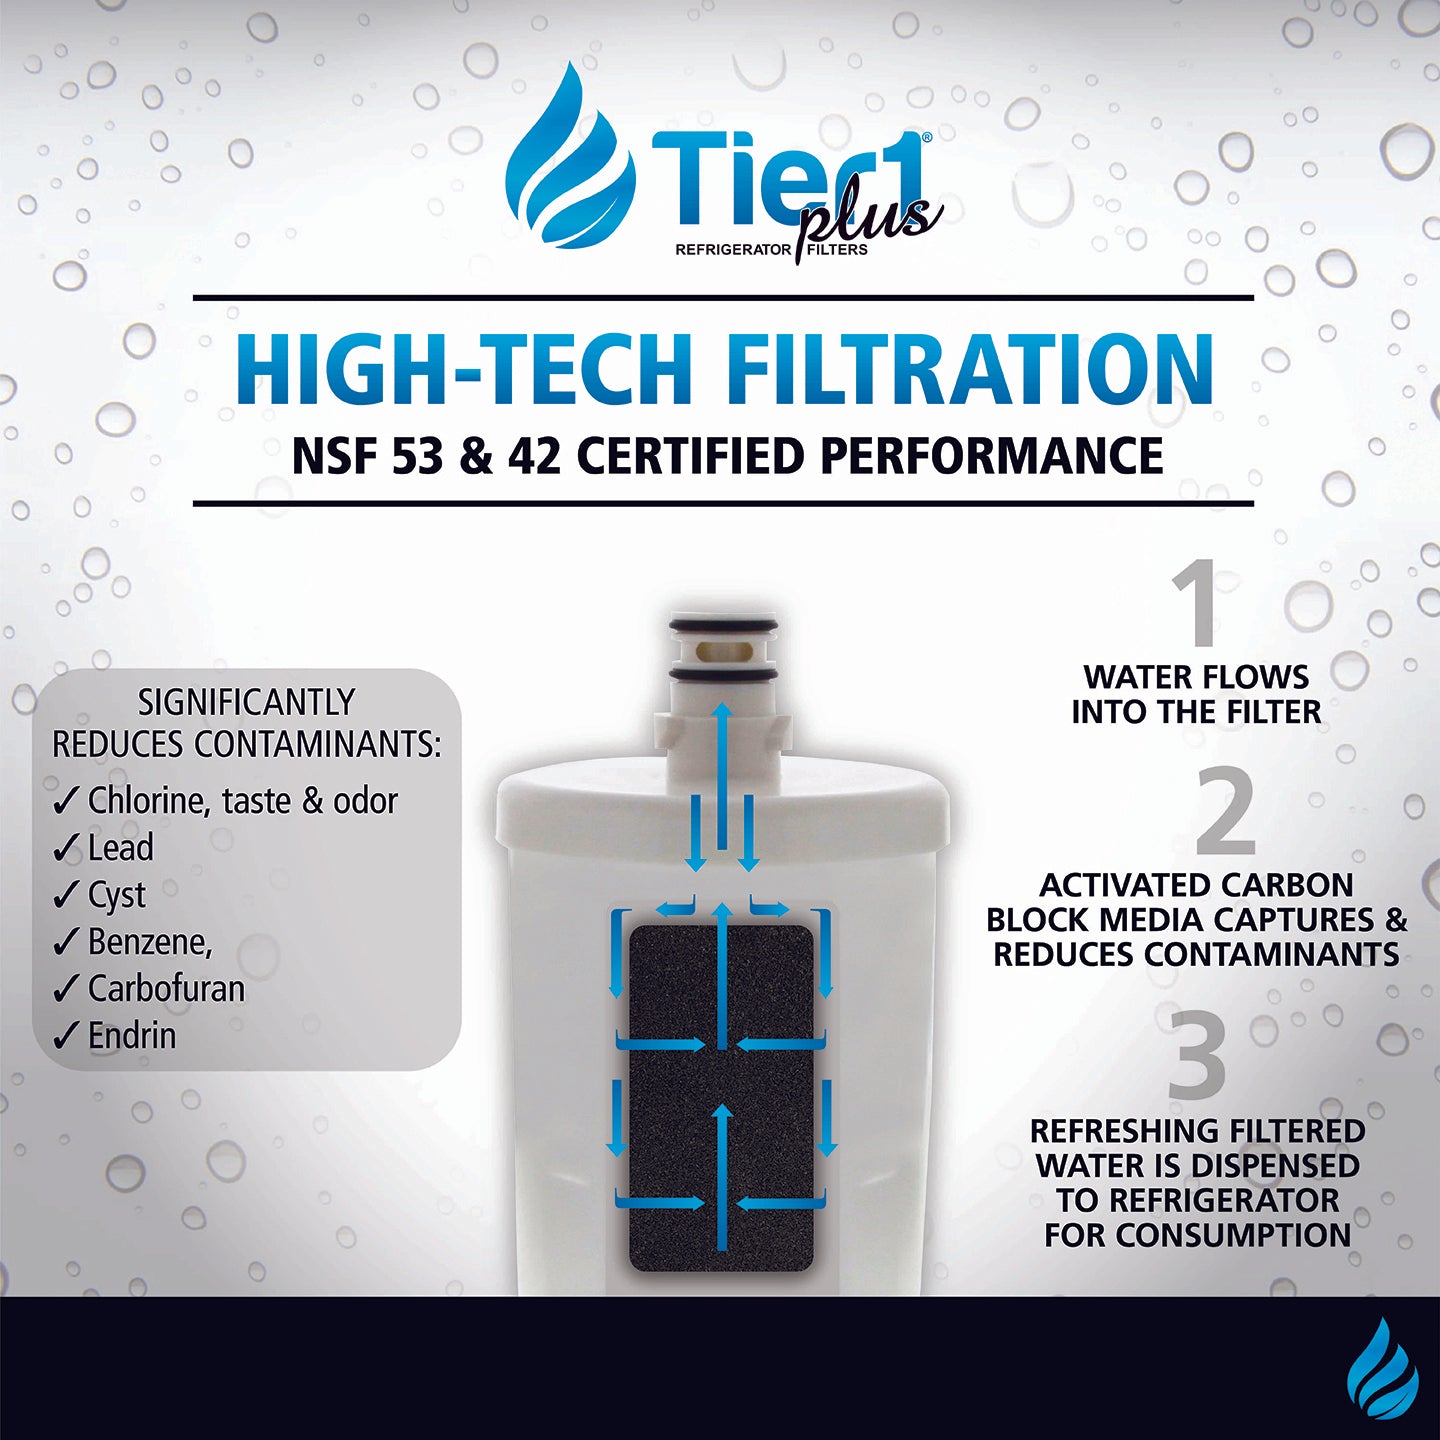 5231JA2002A / LT500P LG Comparable Tier1 Plus Refrigerator Water Filter Replacement (High Tech Filtration)